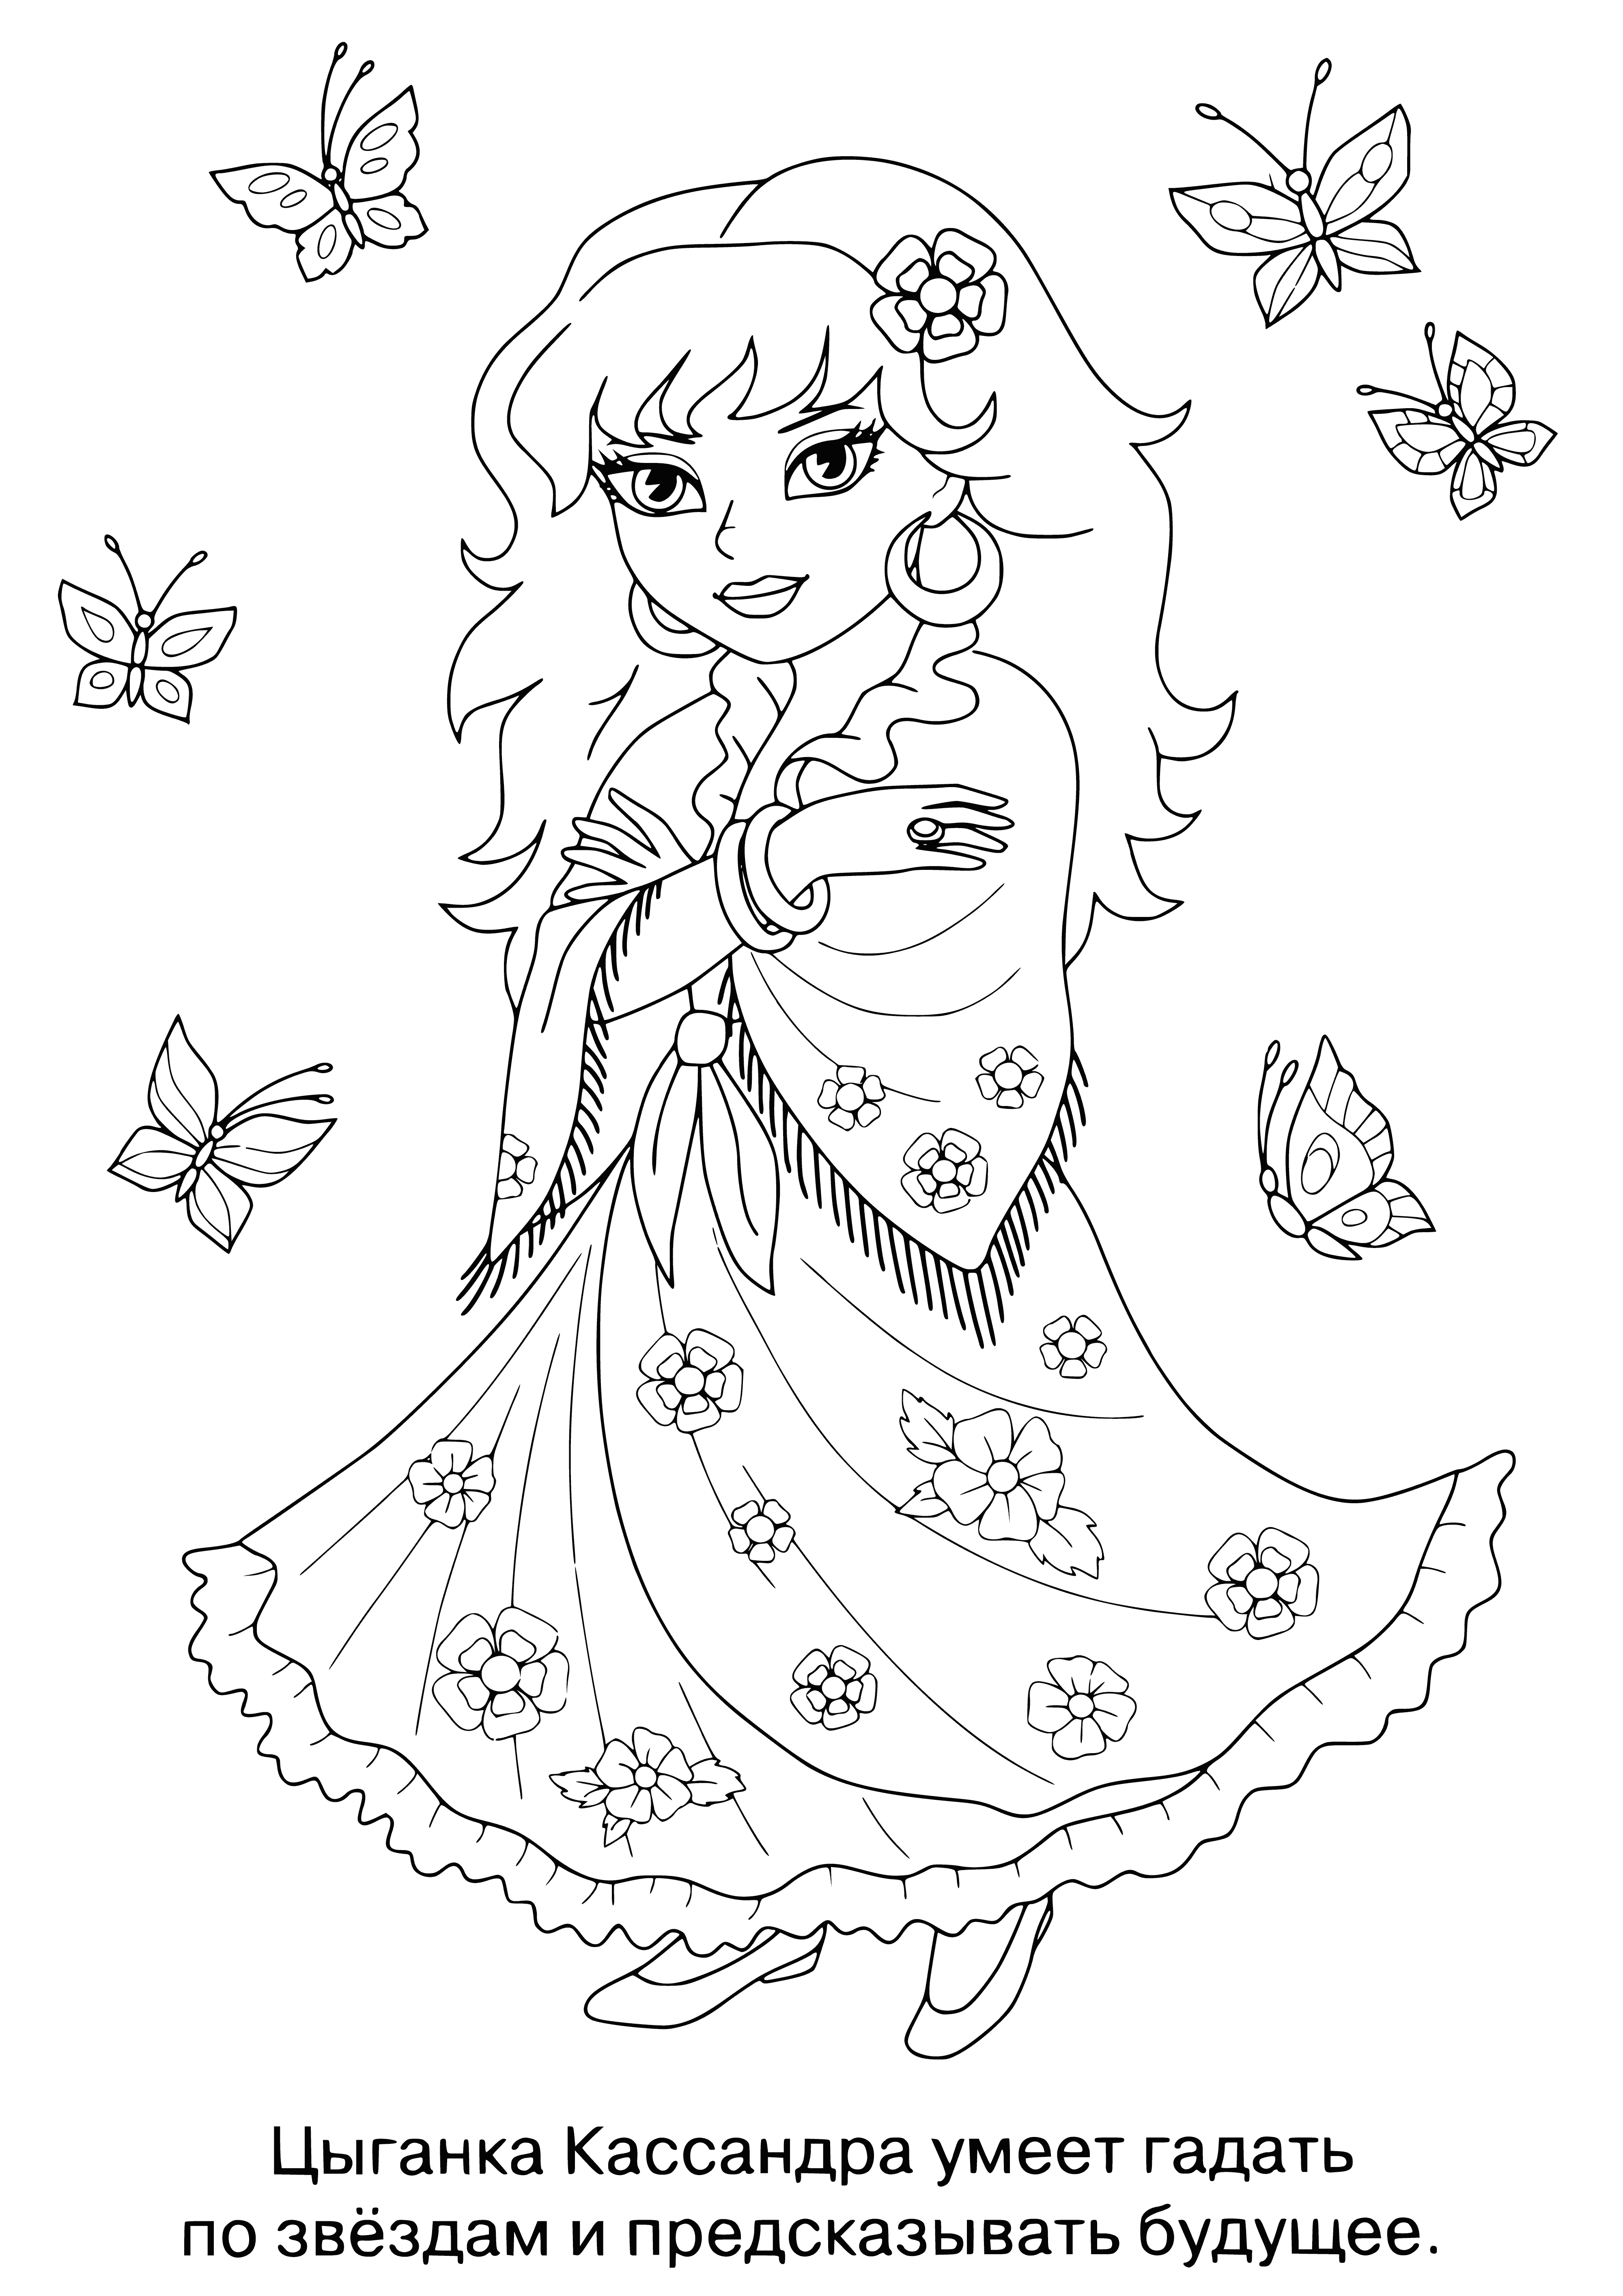 coloring page: Little girl in a colorful dress and scarf surrounded by cats, leaning on a tree.